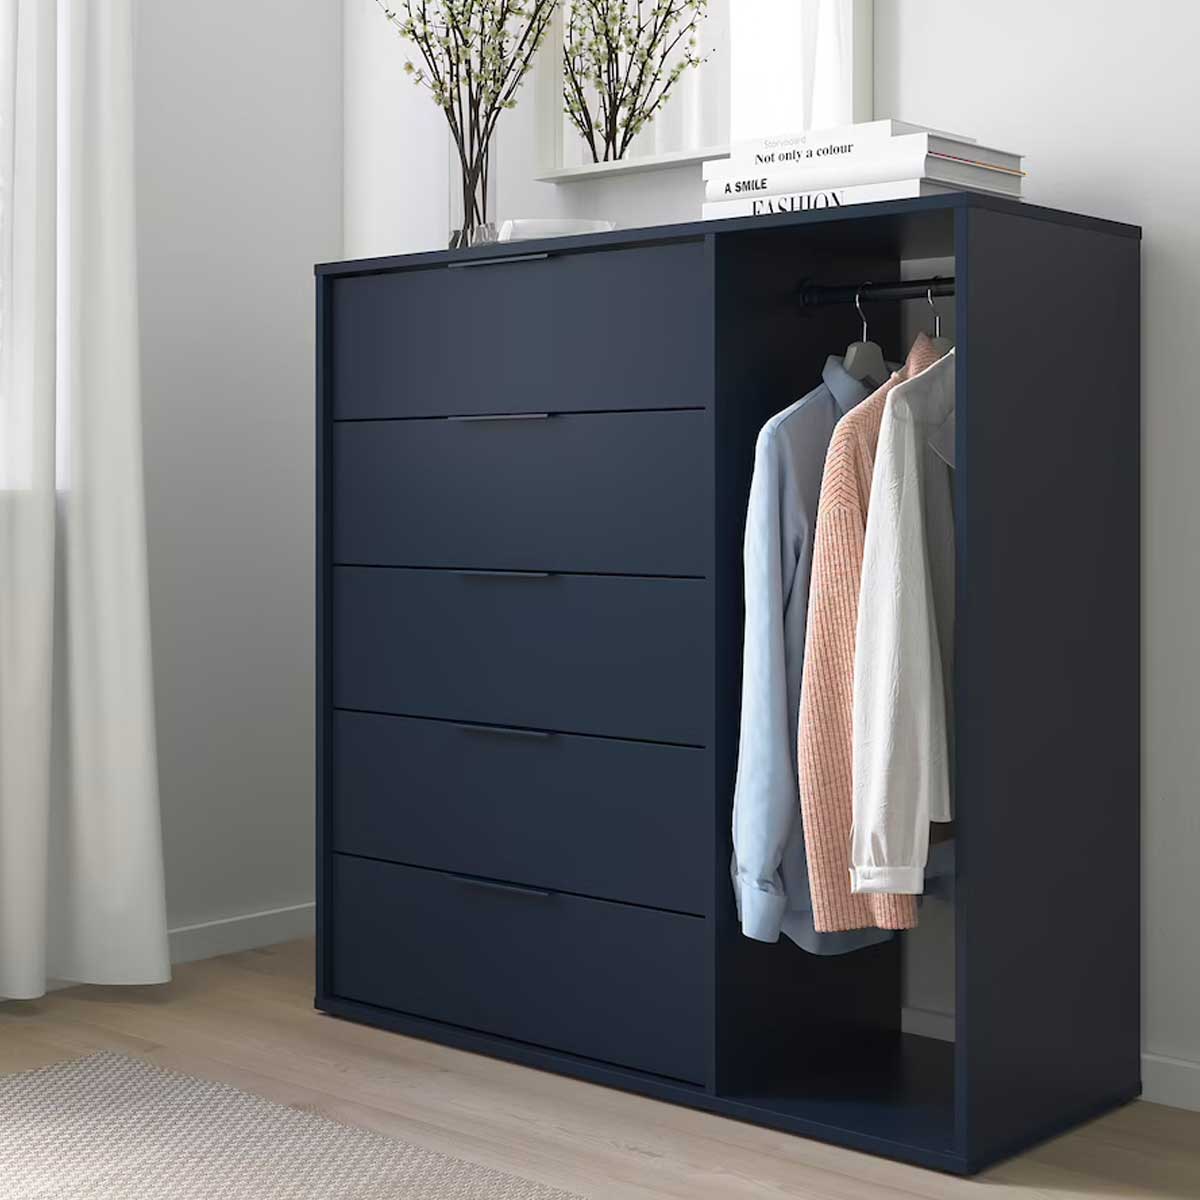 Nordmela chest of drawers